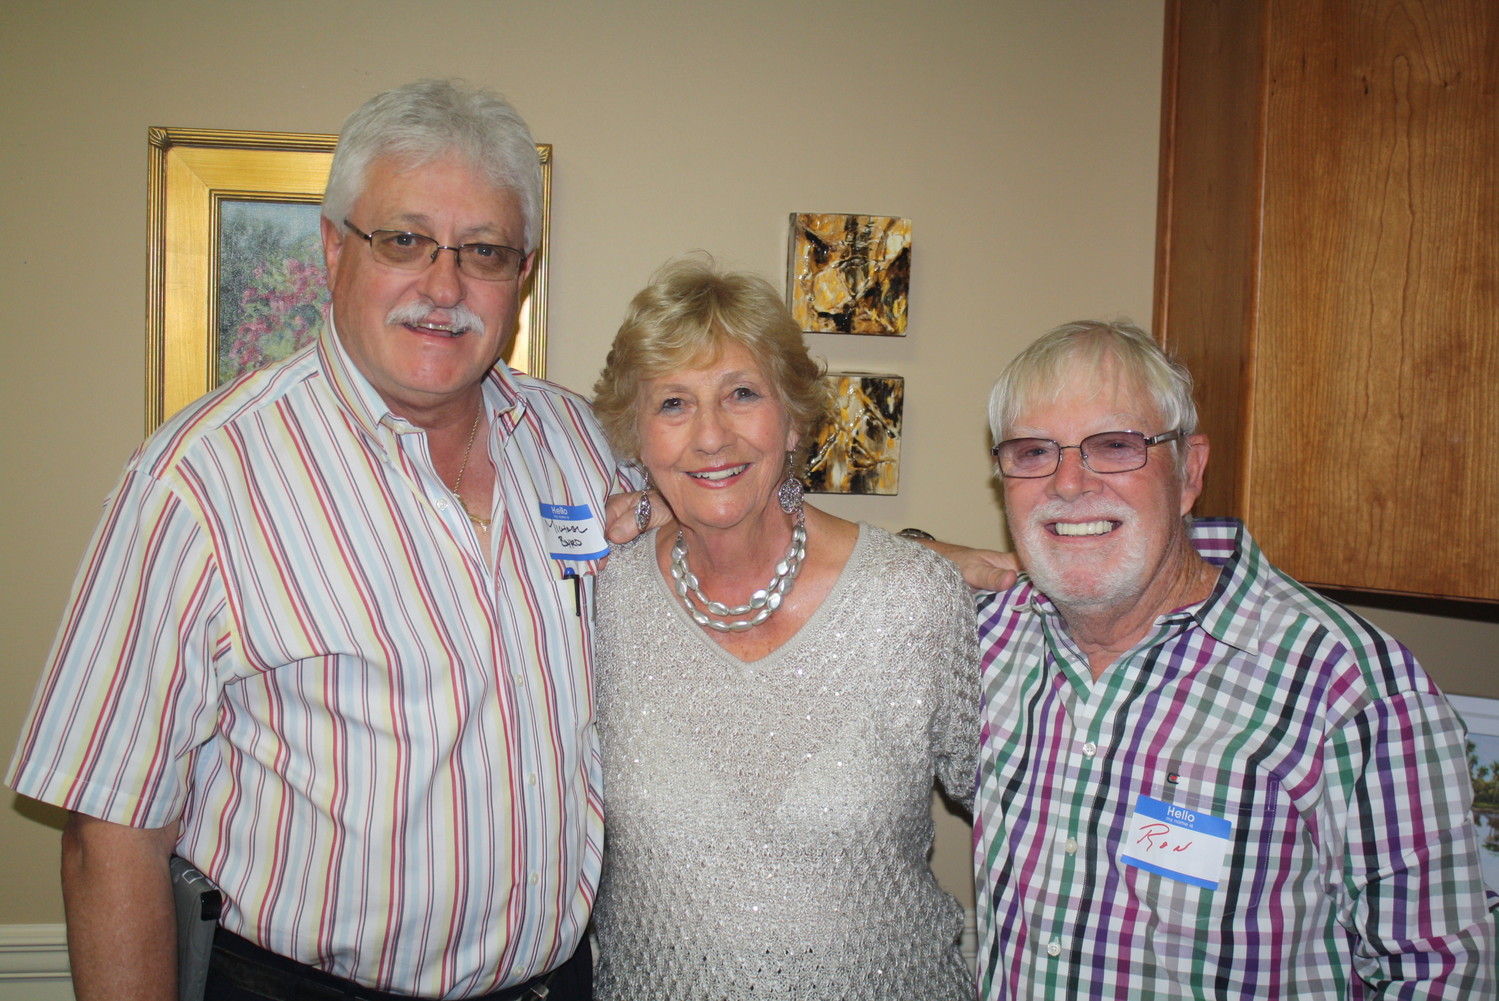 Michael Byrd, Marge Monteith and Ron Collins